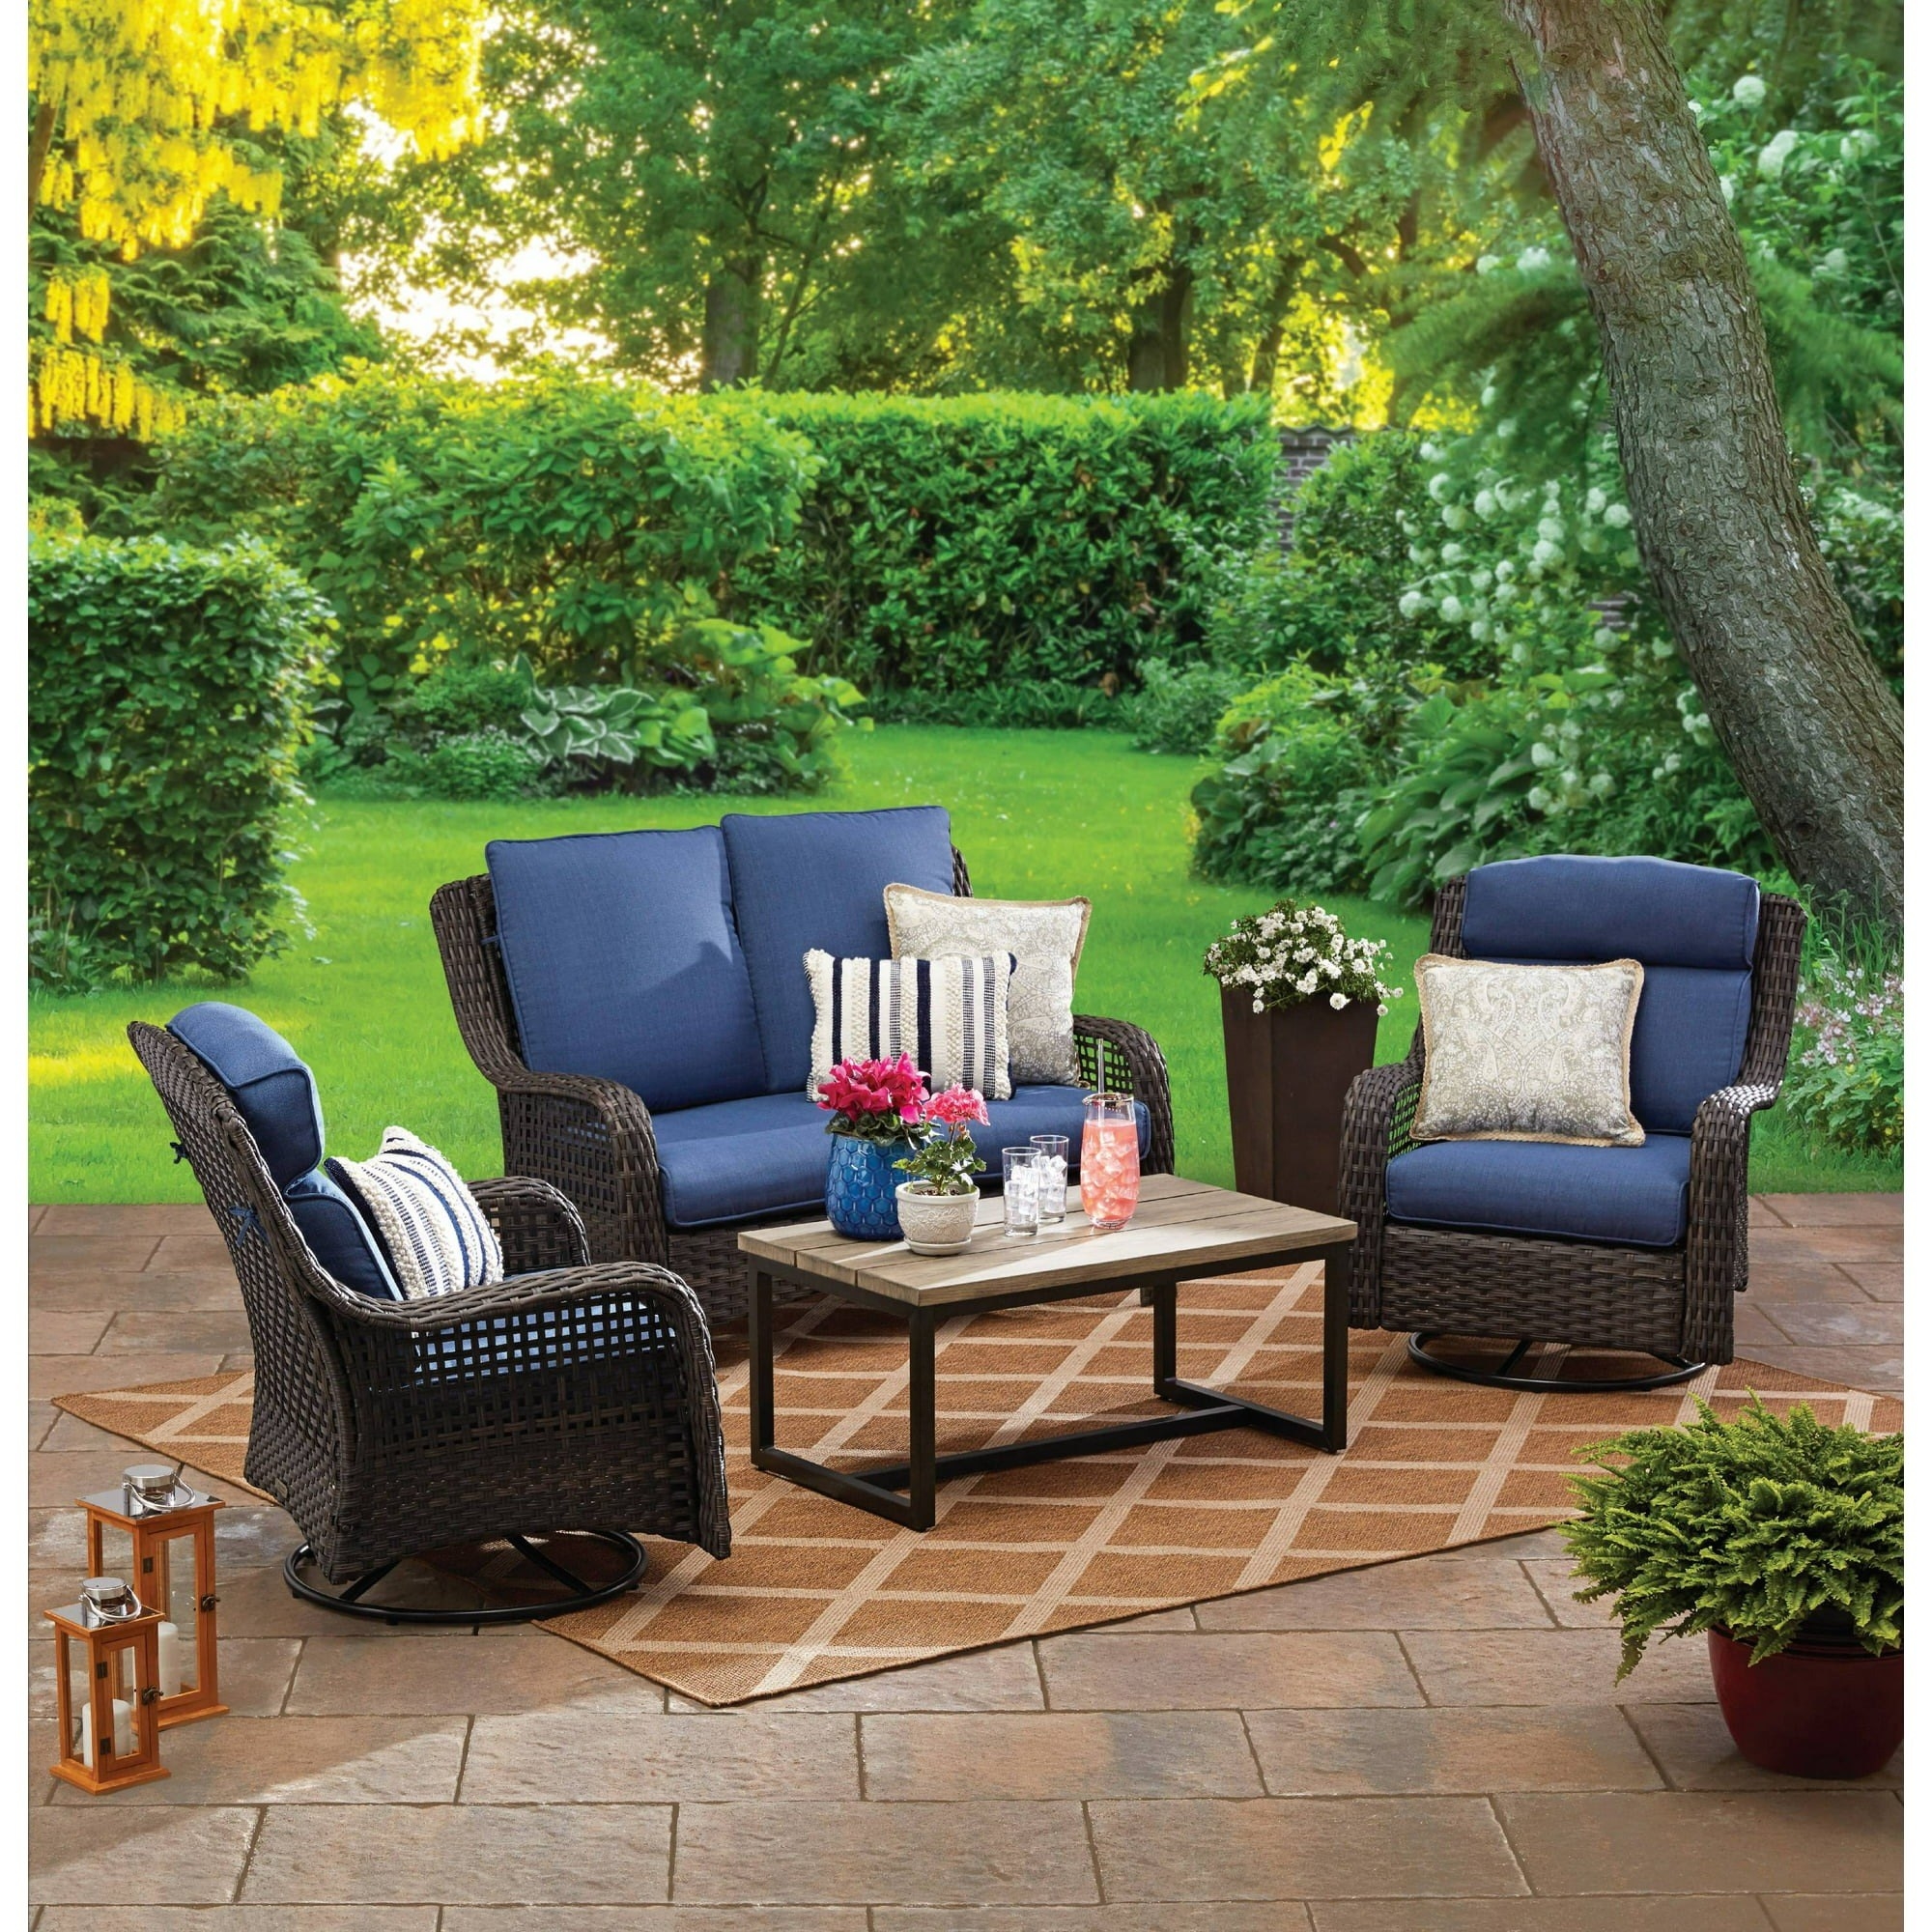 the four-piece furniture set with a loveseat, two swivel chairs, and a coffee table in a backyard